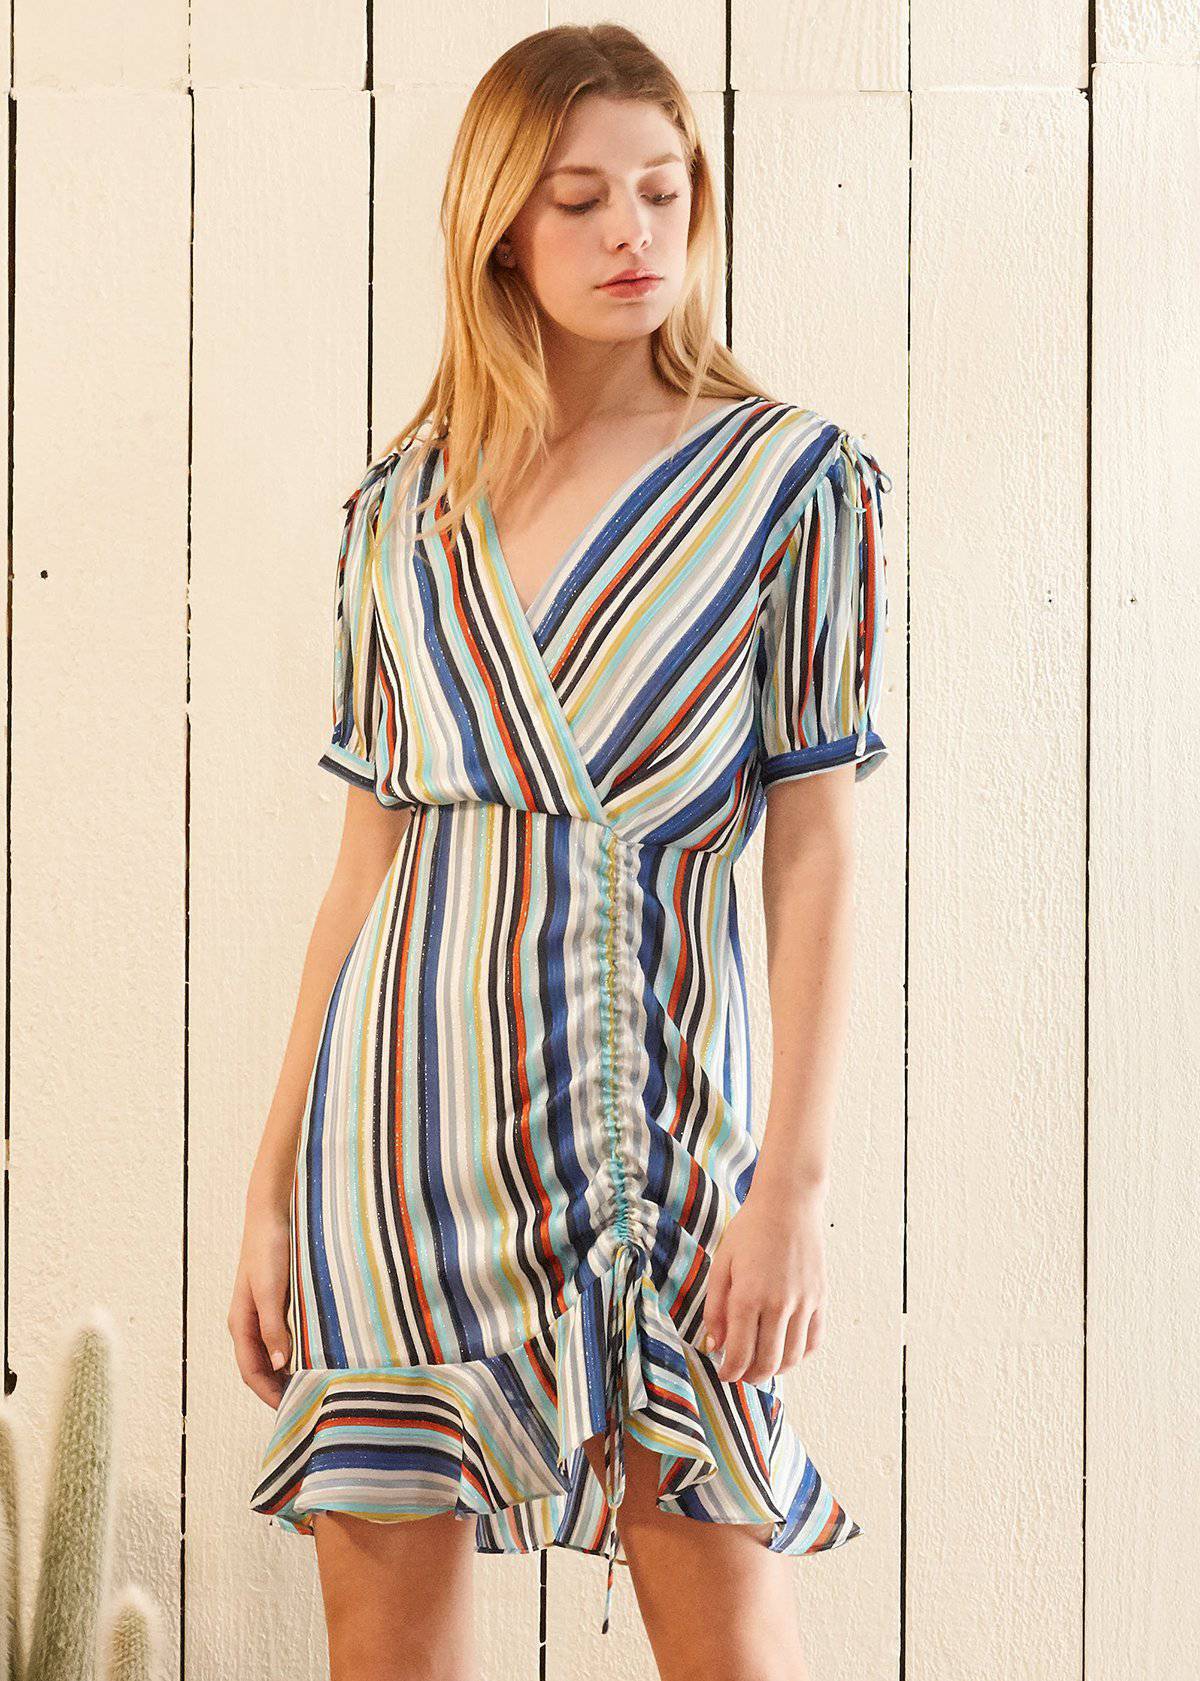 Multi-color Ruched Dress in Beach by Shop at Konus